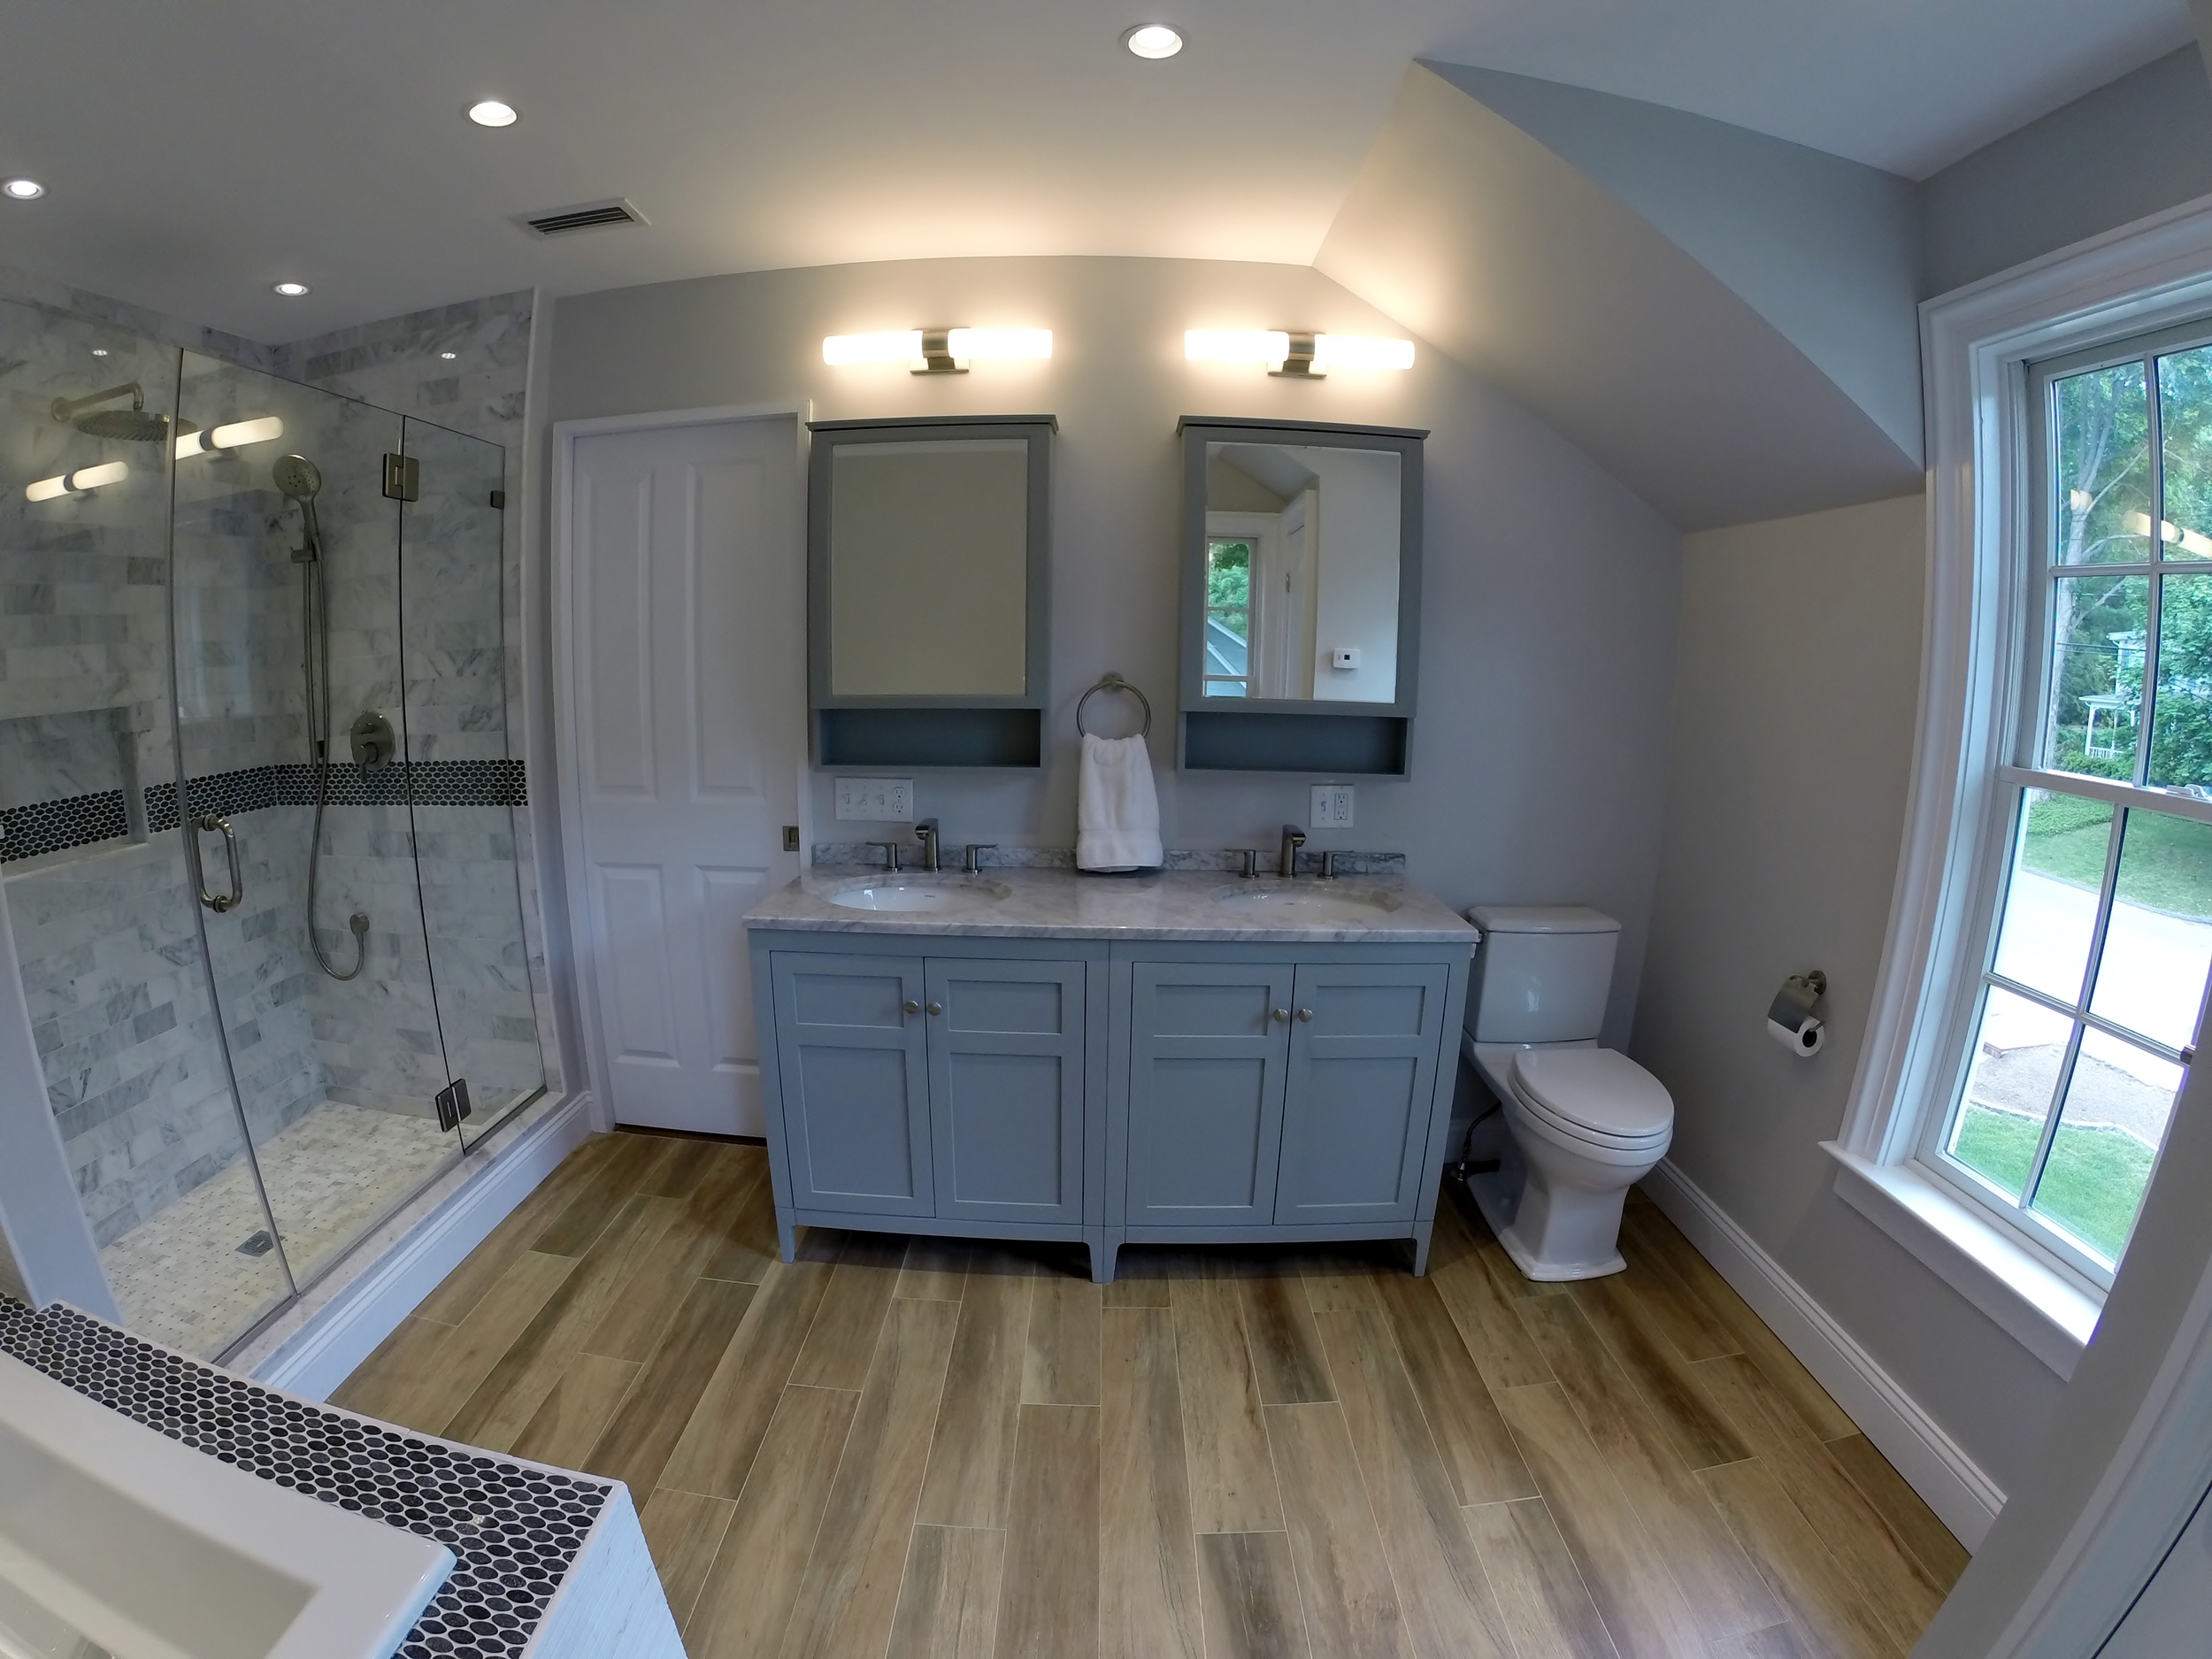 Bathroom Design and Remodel in Essex CT | Shaw Remodeling